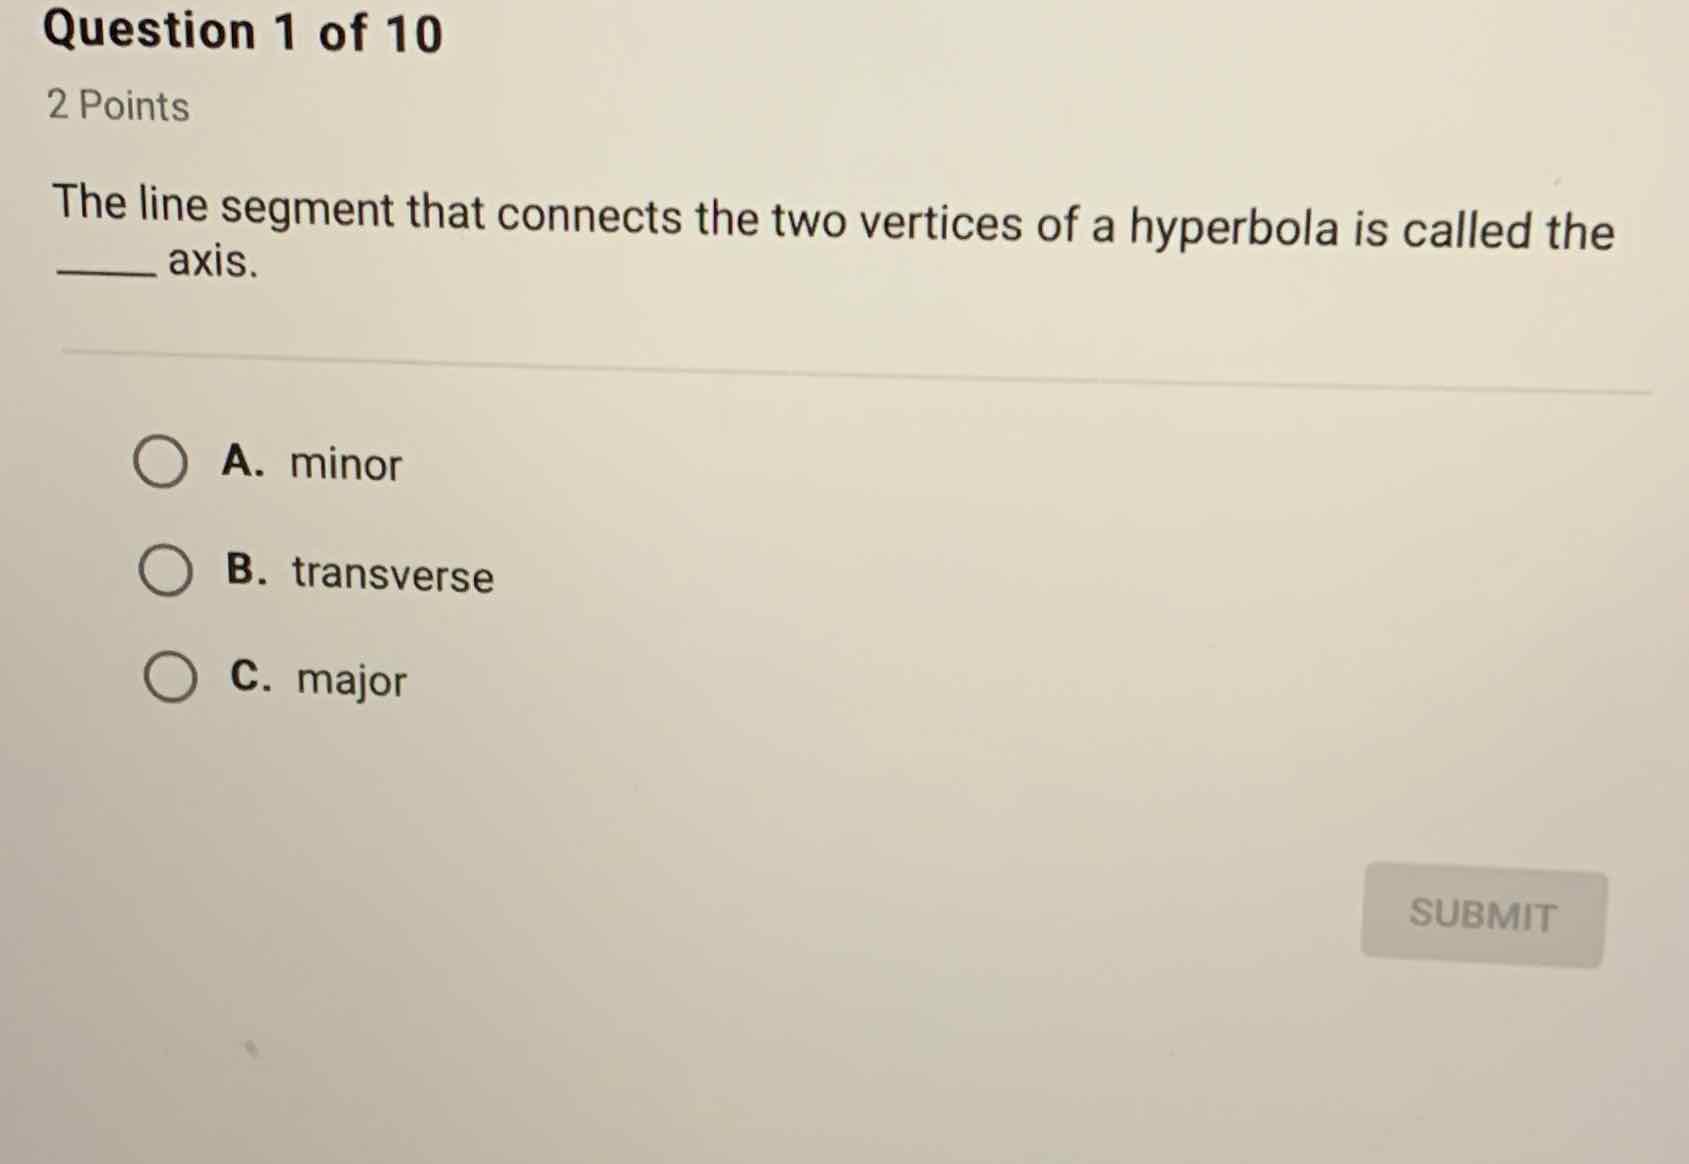 Question 1 of 10
2 Points
The line segment that connects the two vertices of a hyperbola is called the axis.
A. minor
B. transverse
C. major